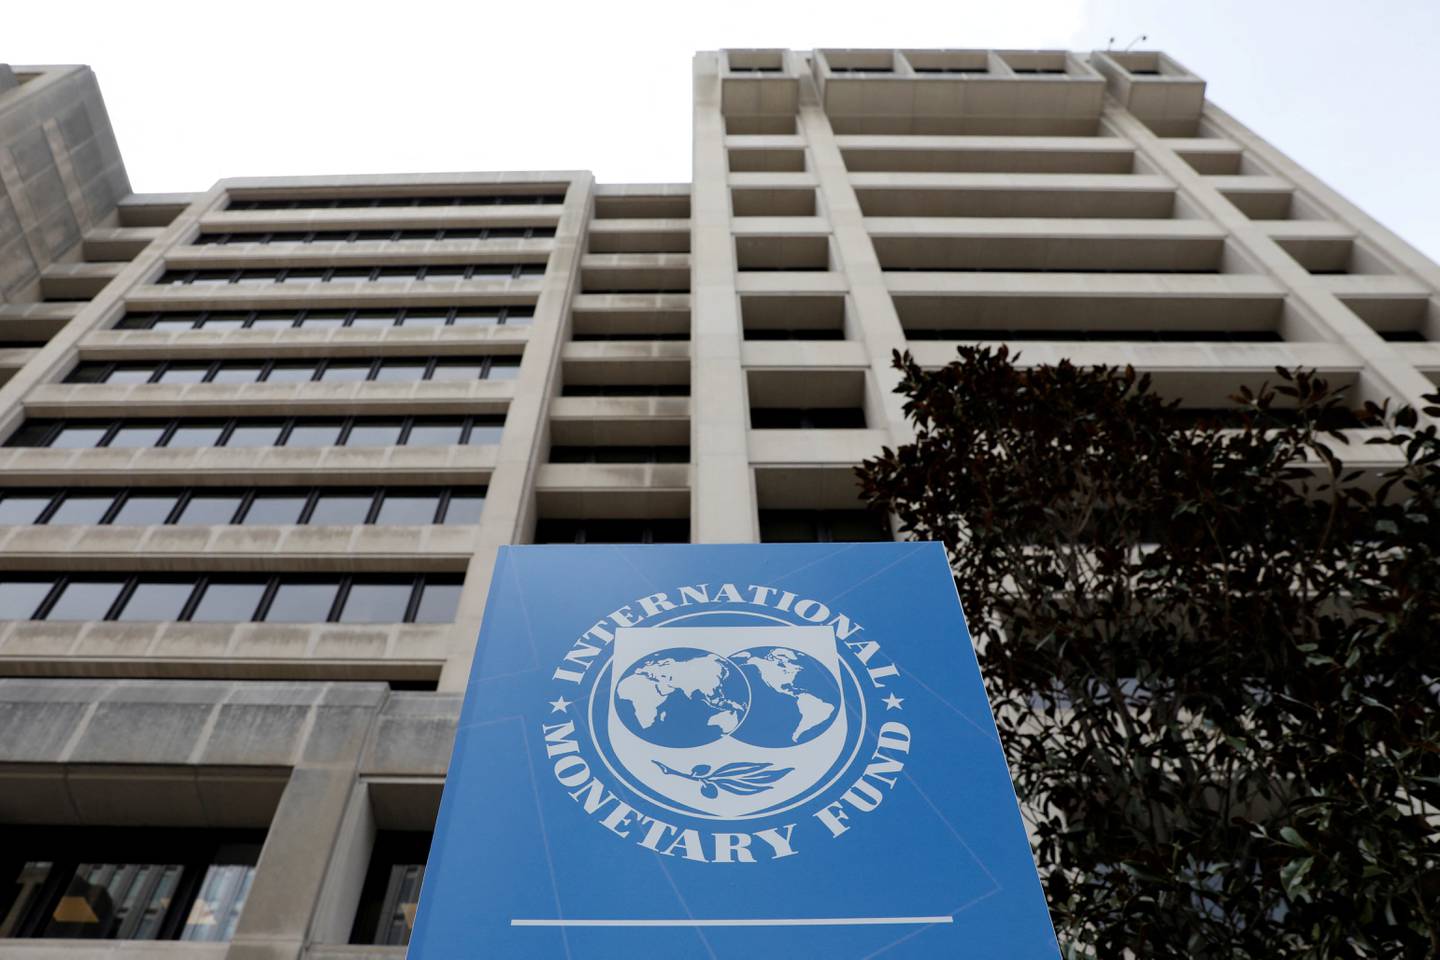 The International Monetary Fund headquarters building in Washington. The fund says the pandemic and war could cause structural shifts and the current period of very high inflation poses significant risks. Reuters